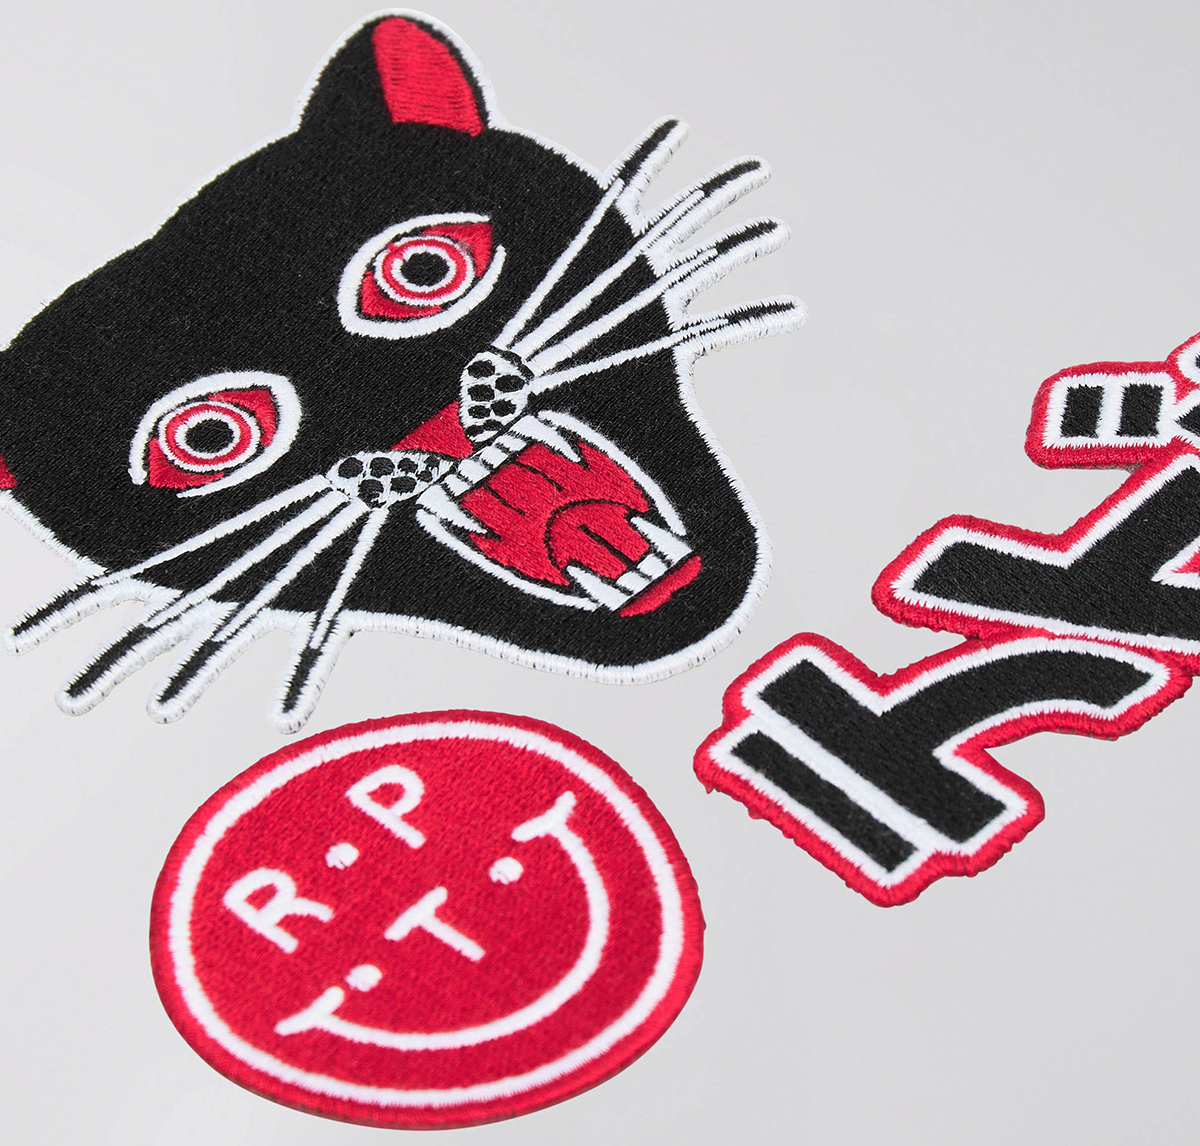 EDWIN x TEIDE - Patches Pack detail